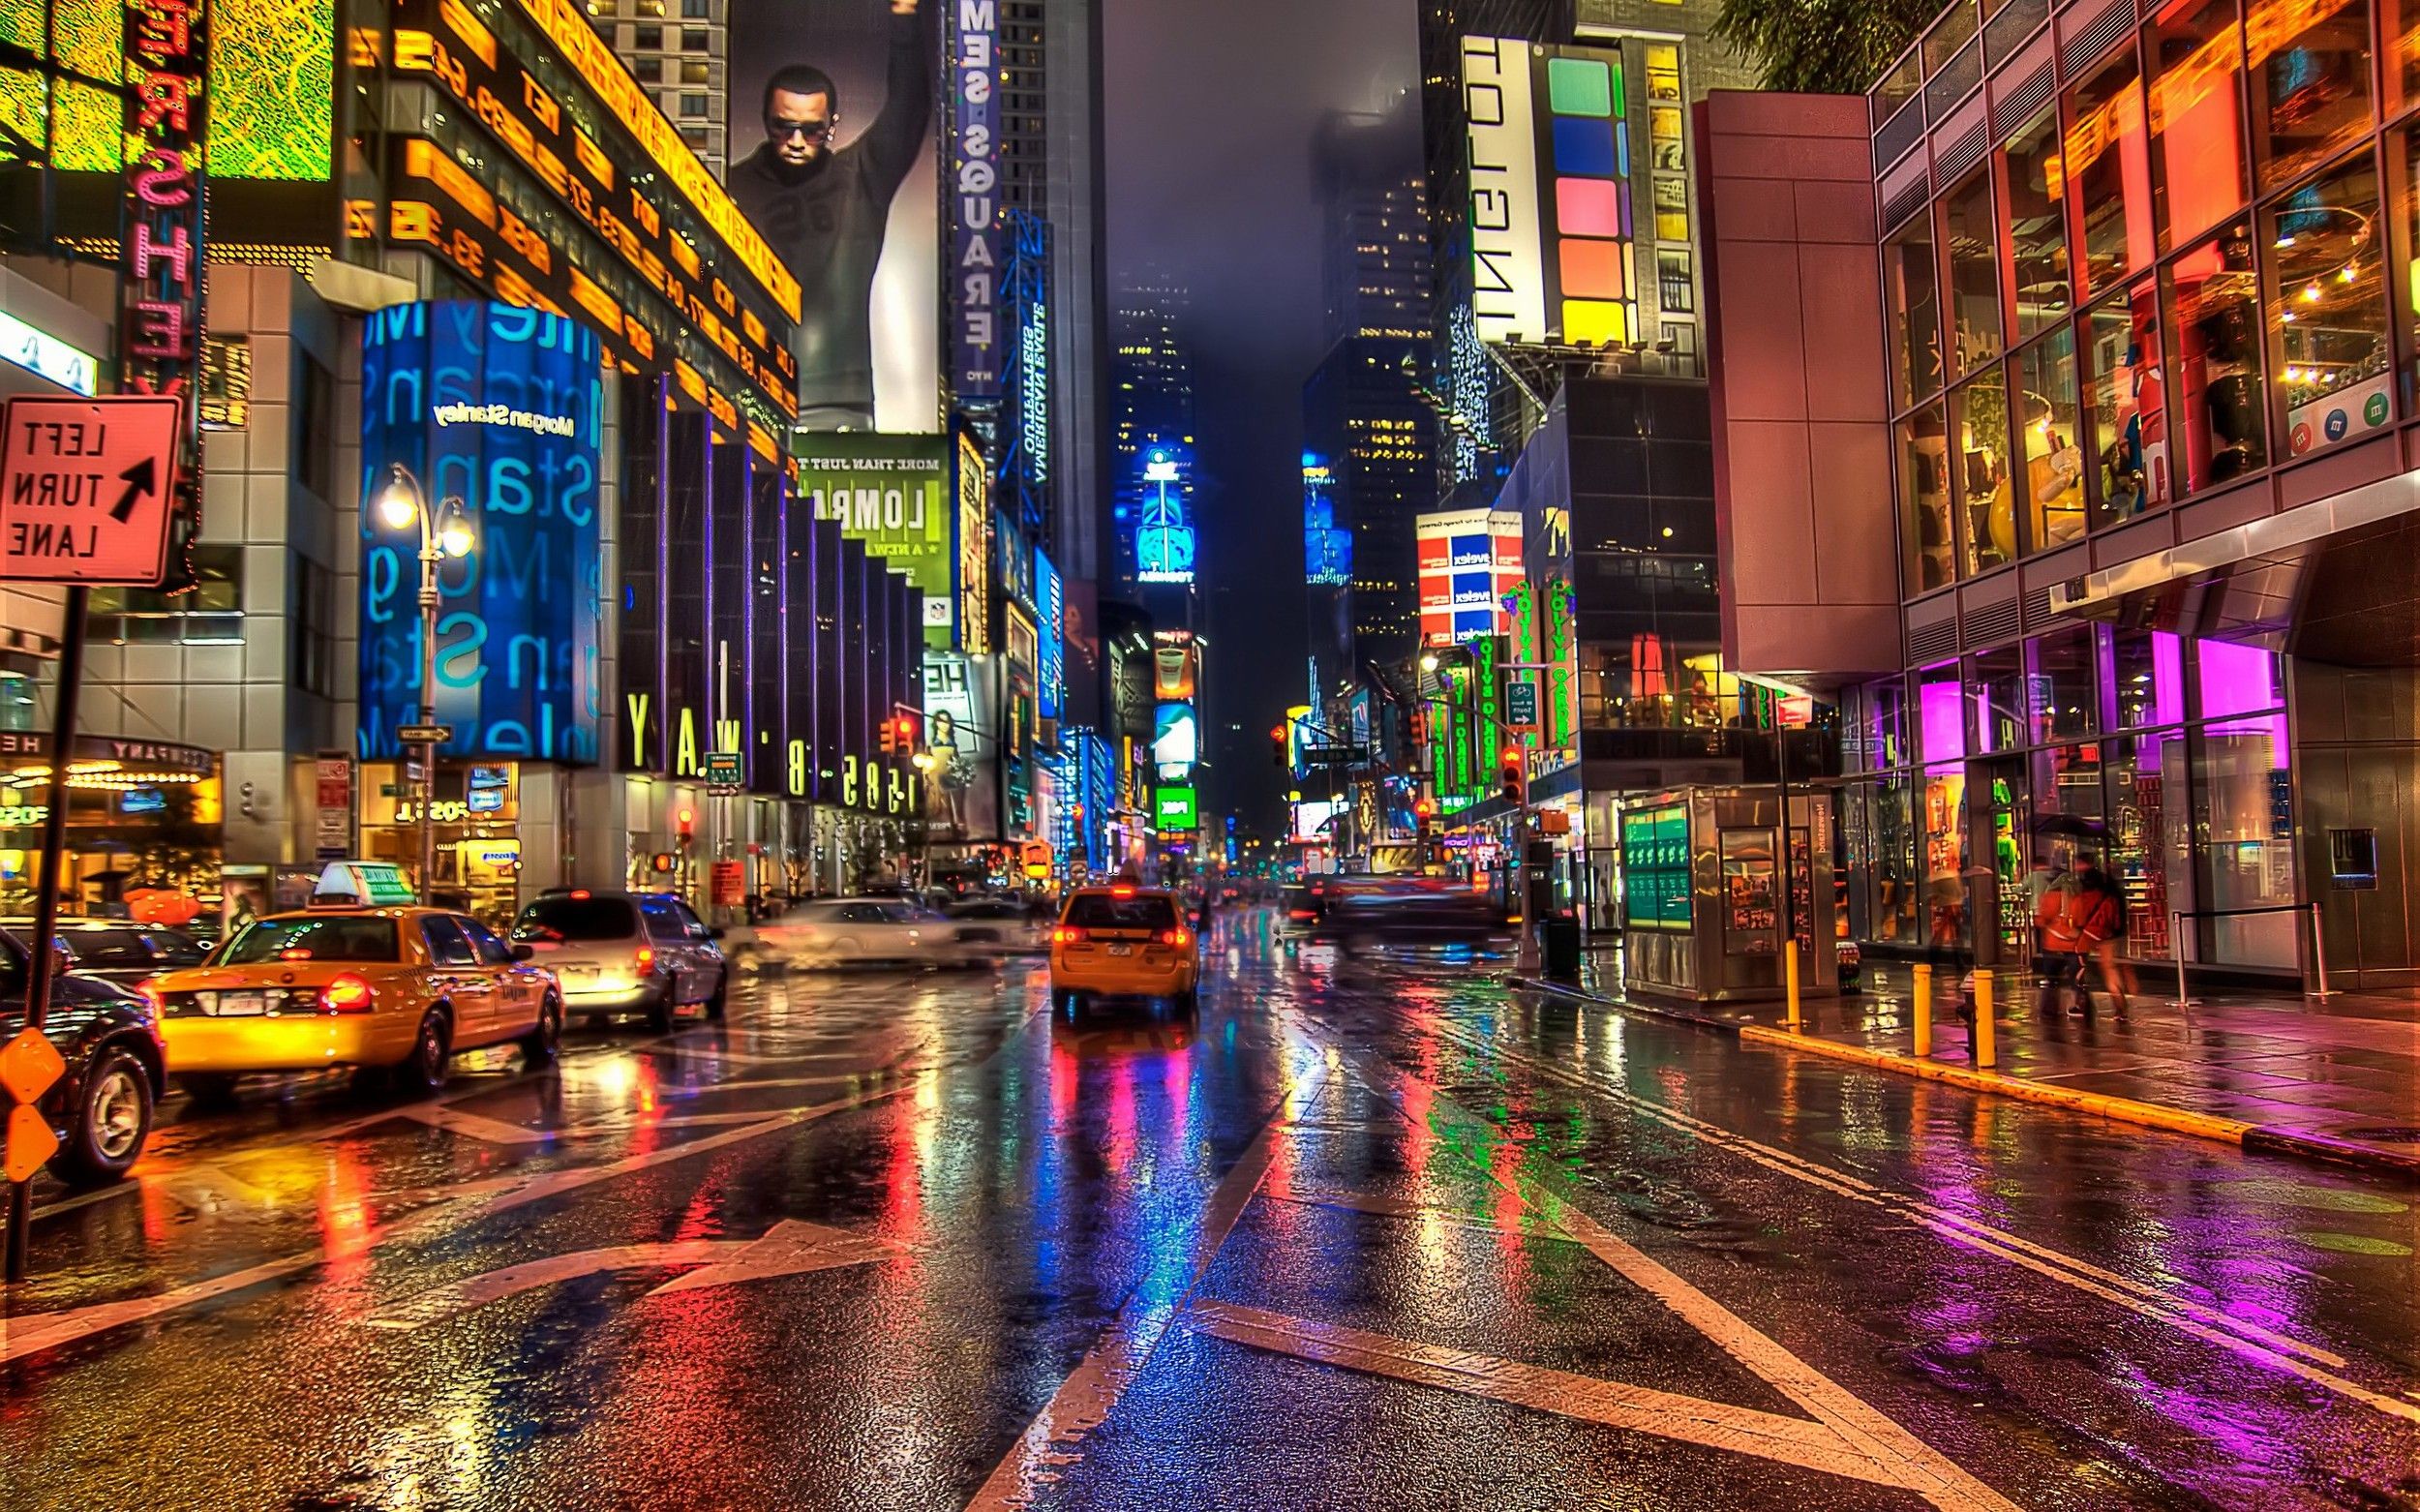 A city street at night with neon lights reflecting off the wet road - Cityscape, New York